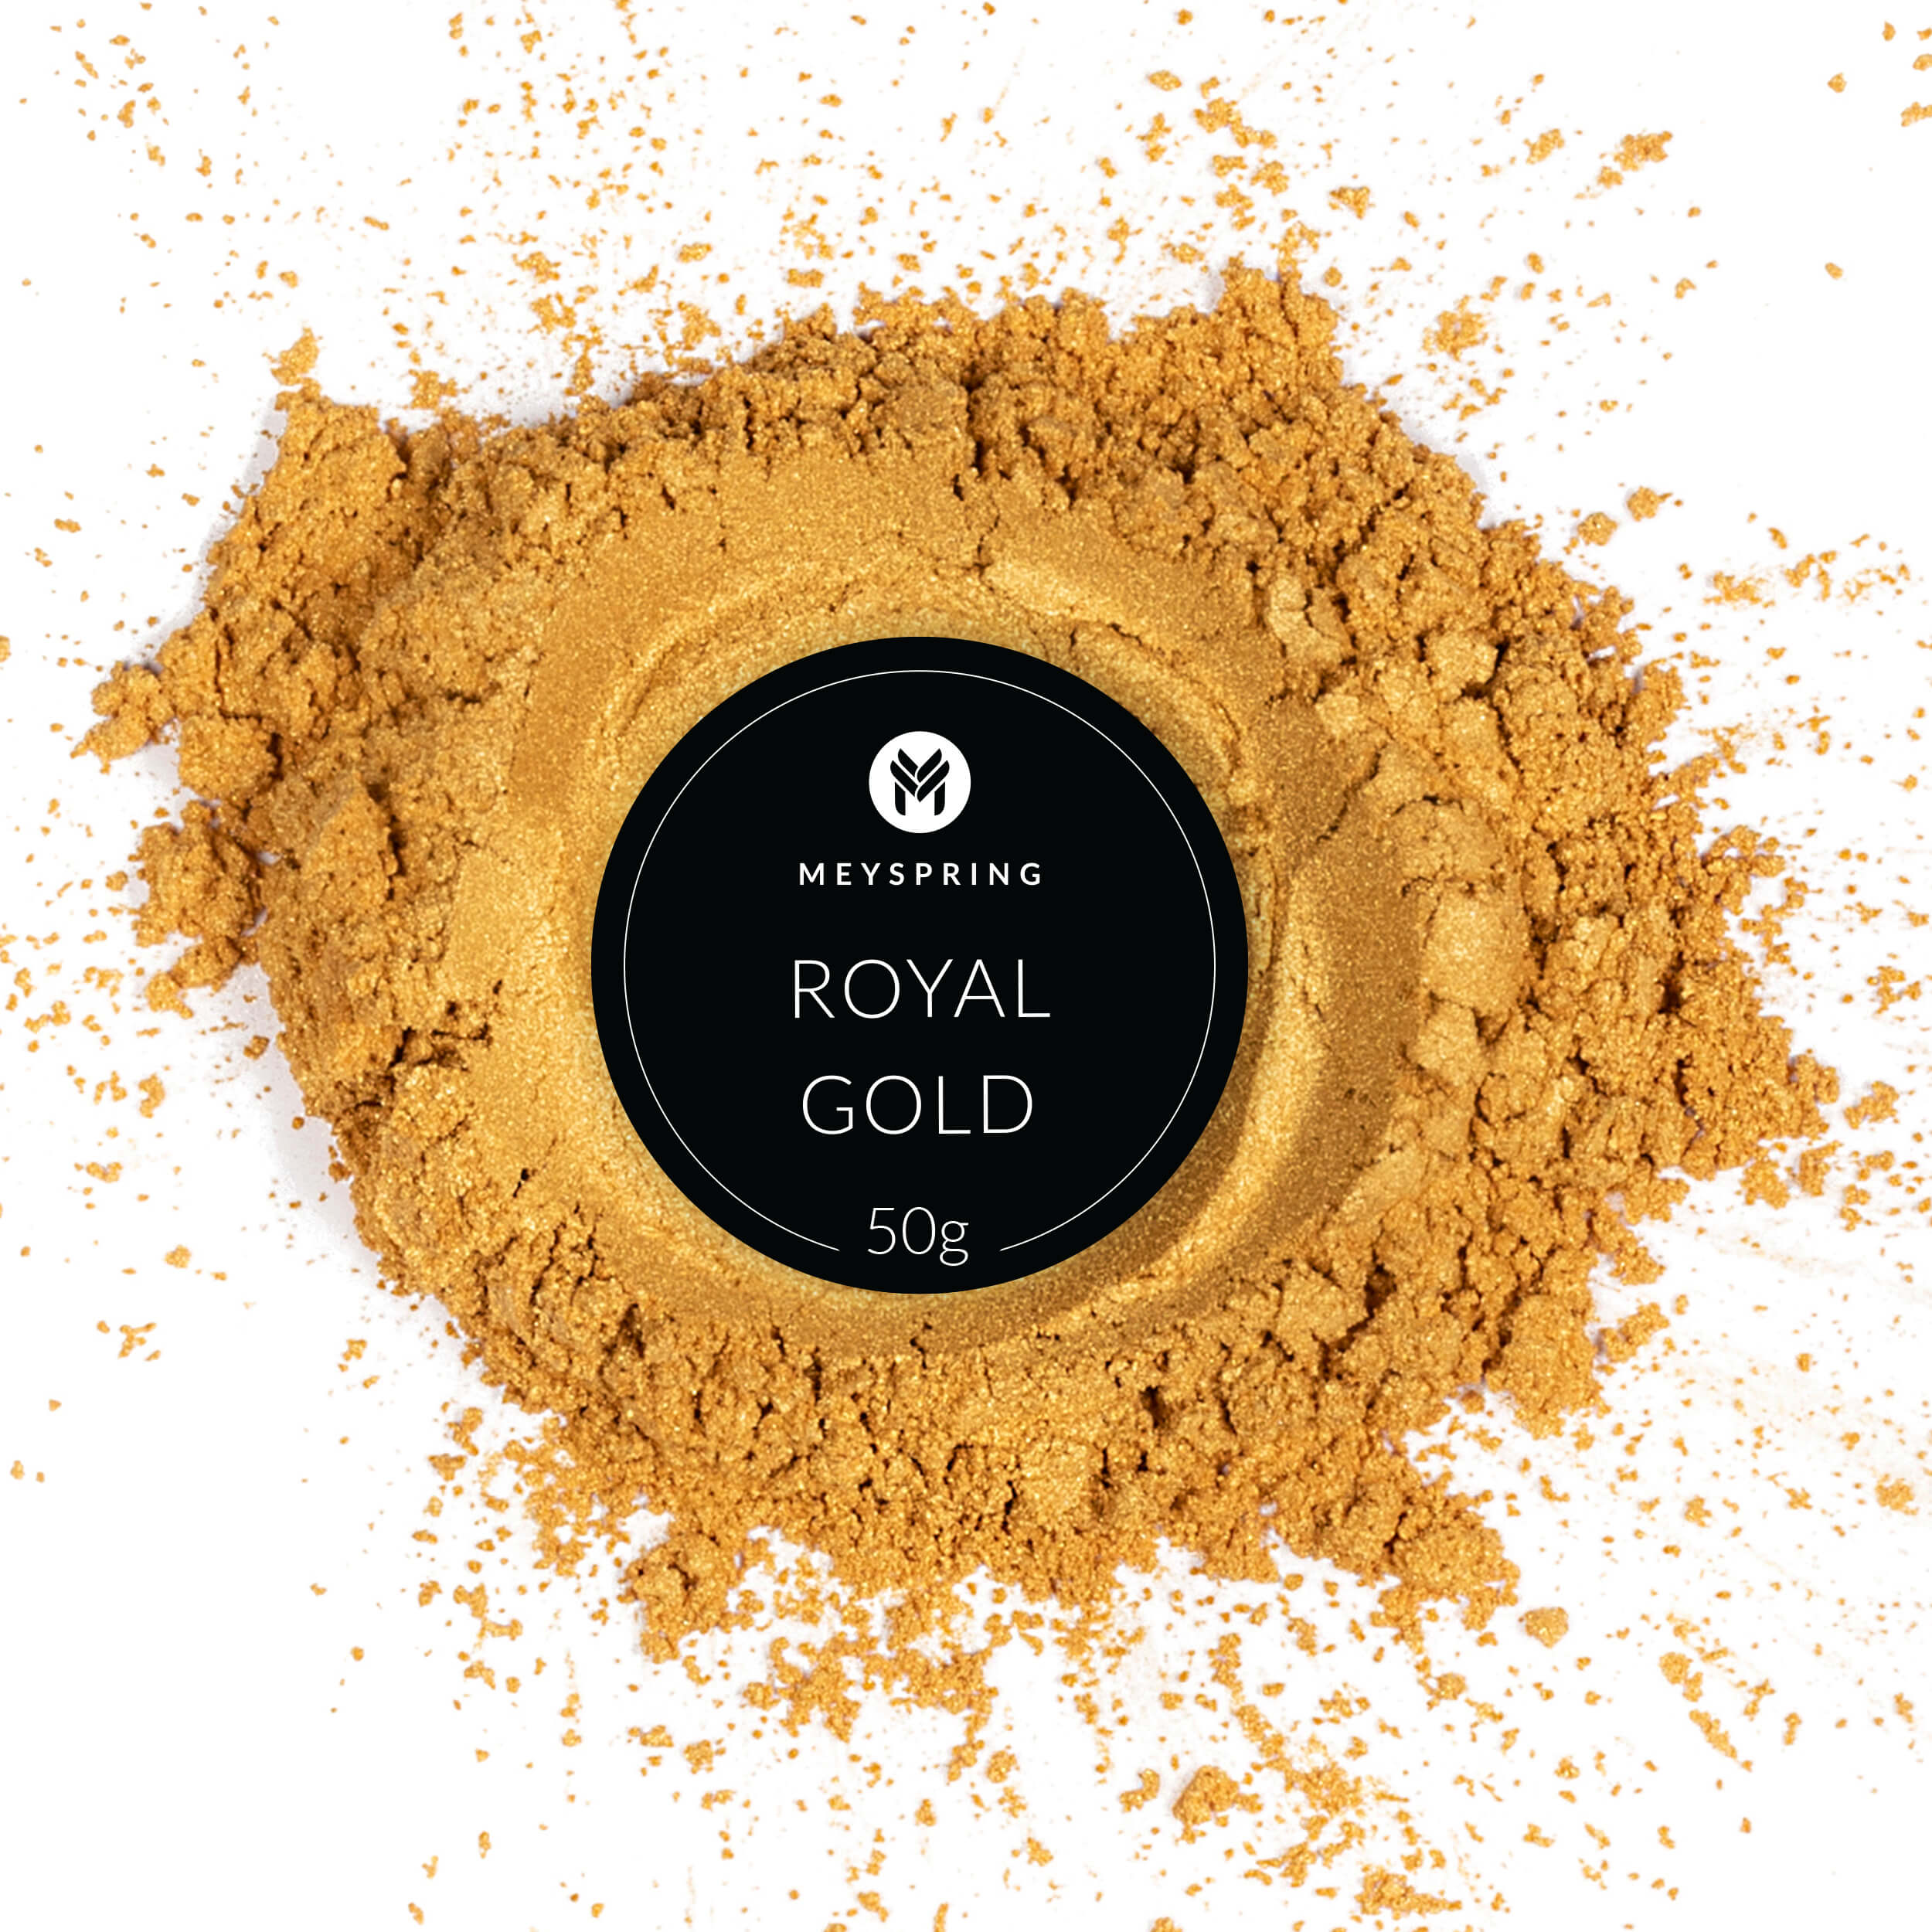 MEYSPRING Royal Gold Epoxy resin color pigment Mica Powder for Resin art